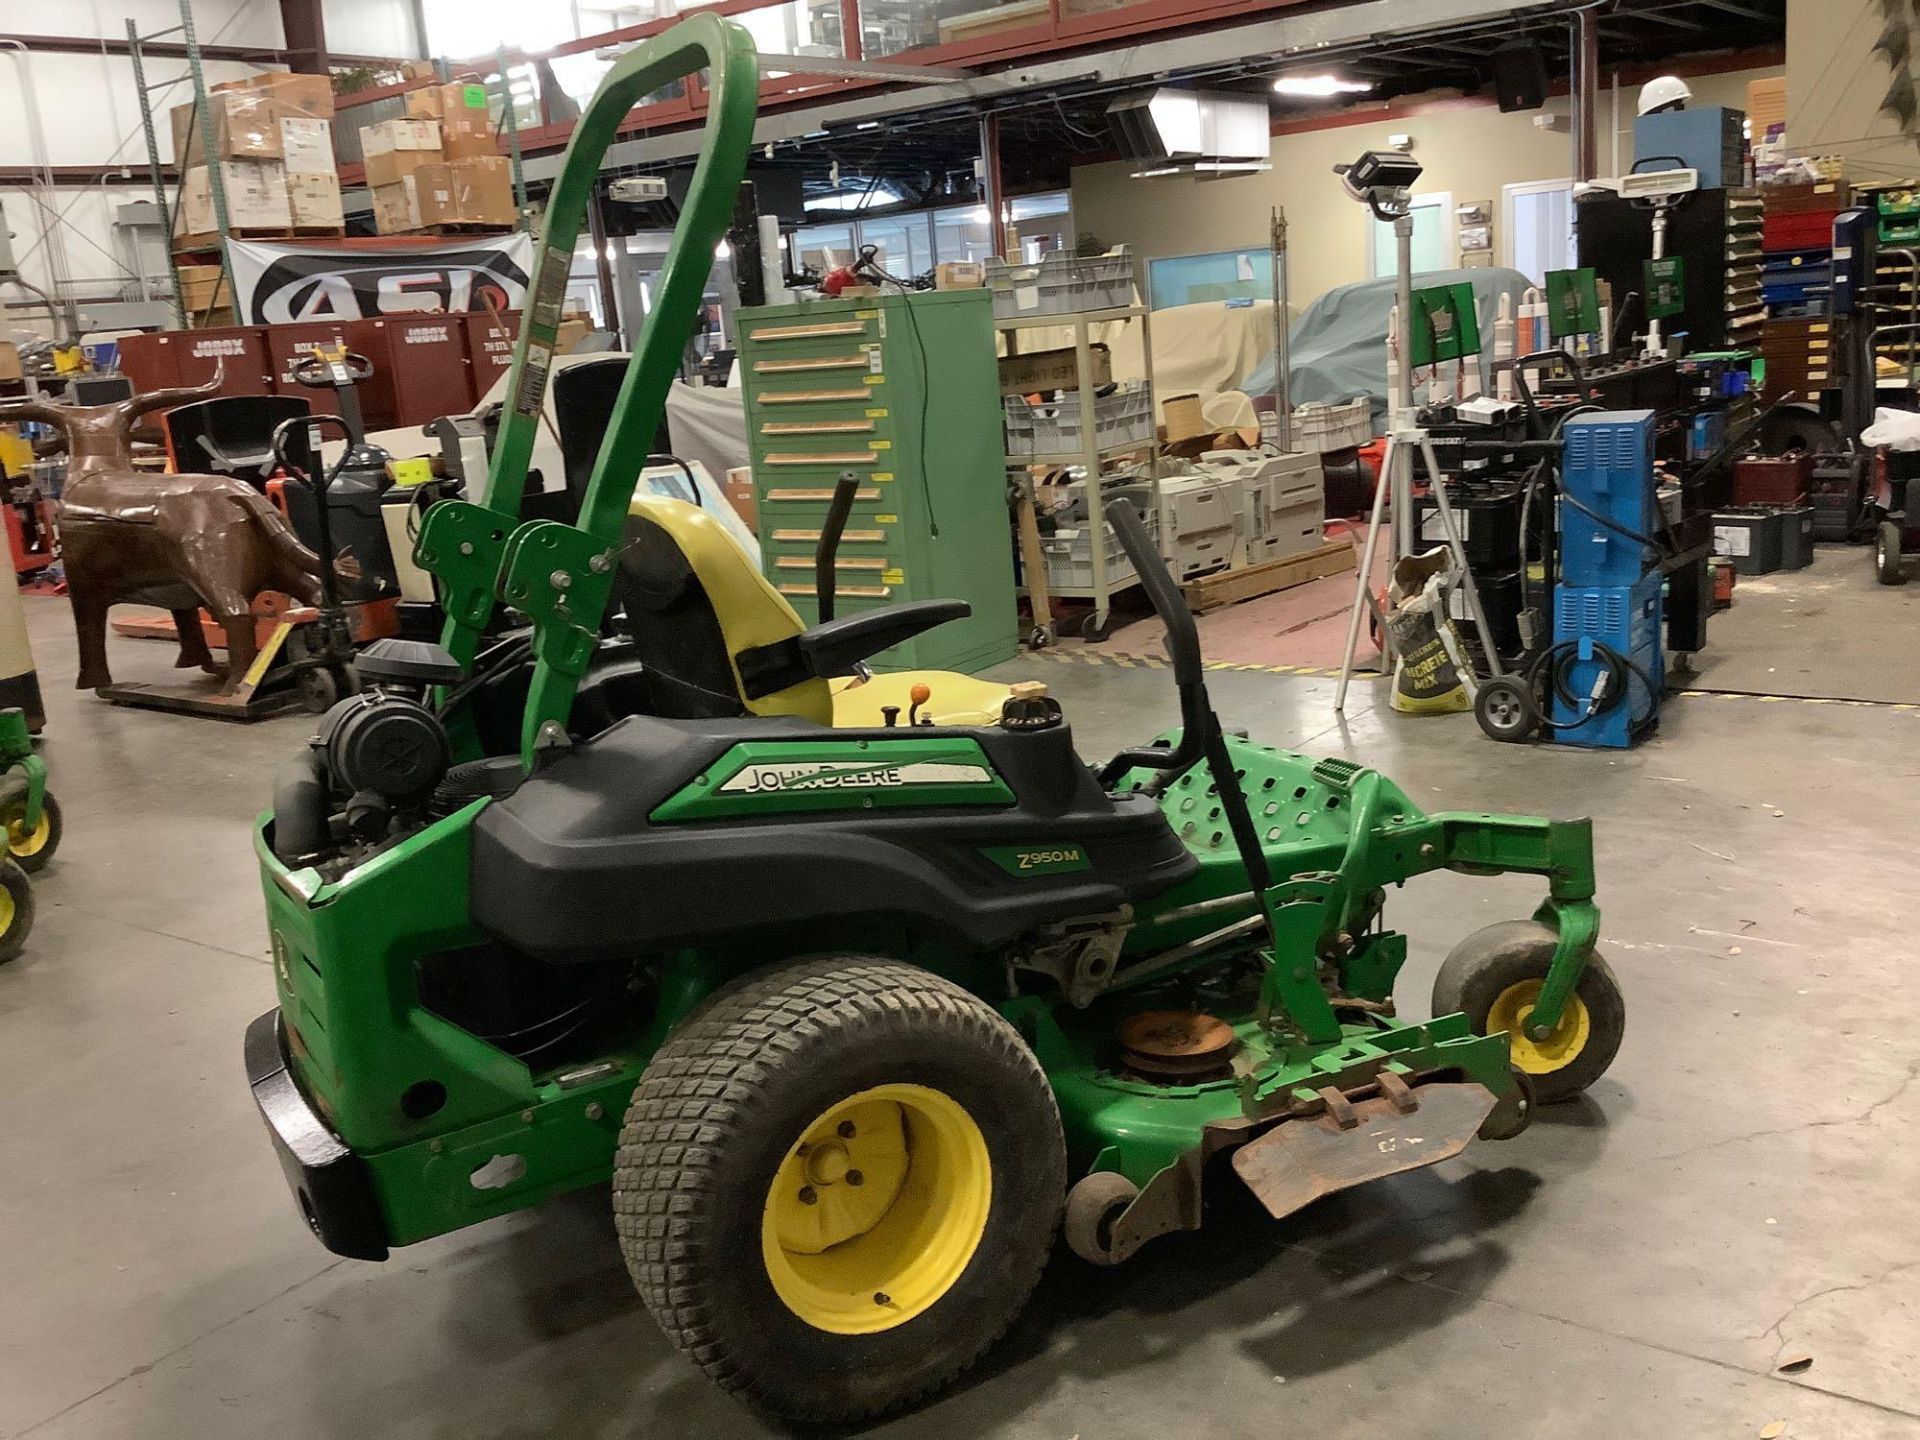 2016 JOHN DEERE COMMERCIAL MOWER MODEL Z950M APPROX 60IN ,GAS POWER, RUNS AND OPERATES - Image 3 of 7